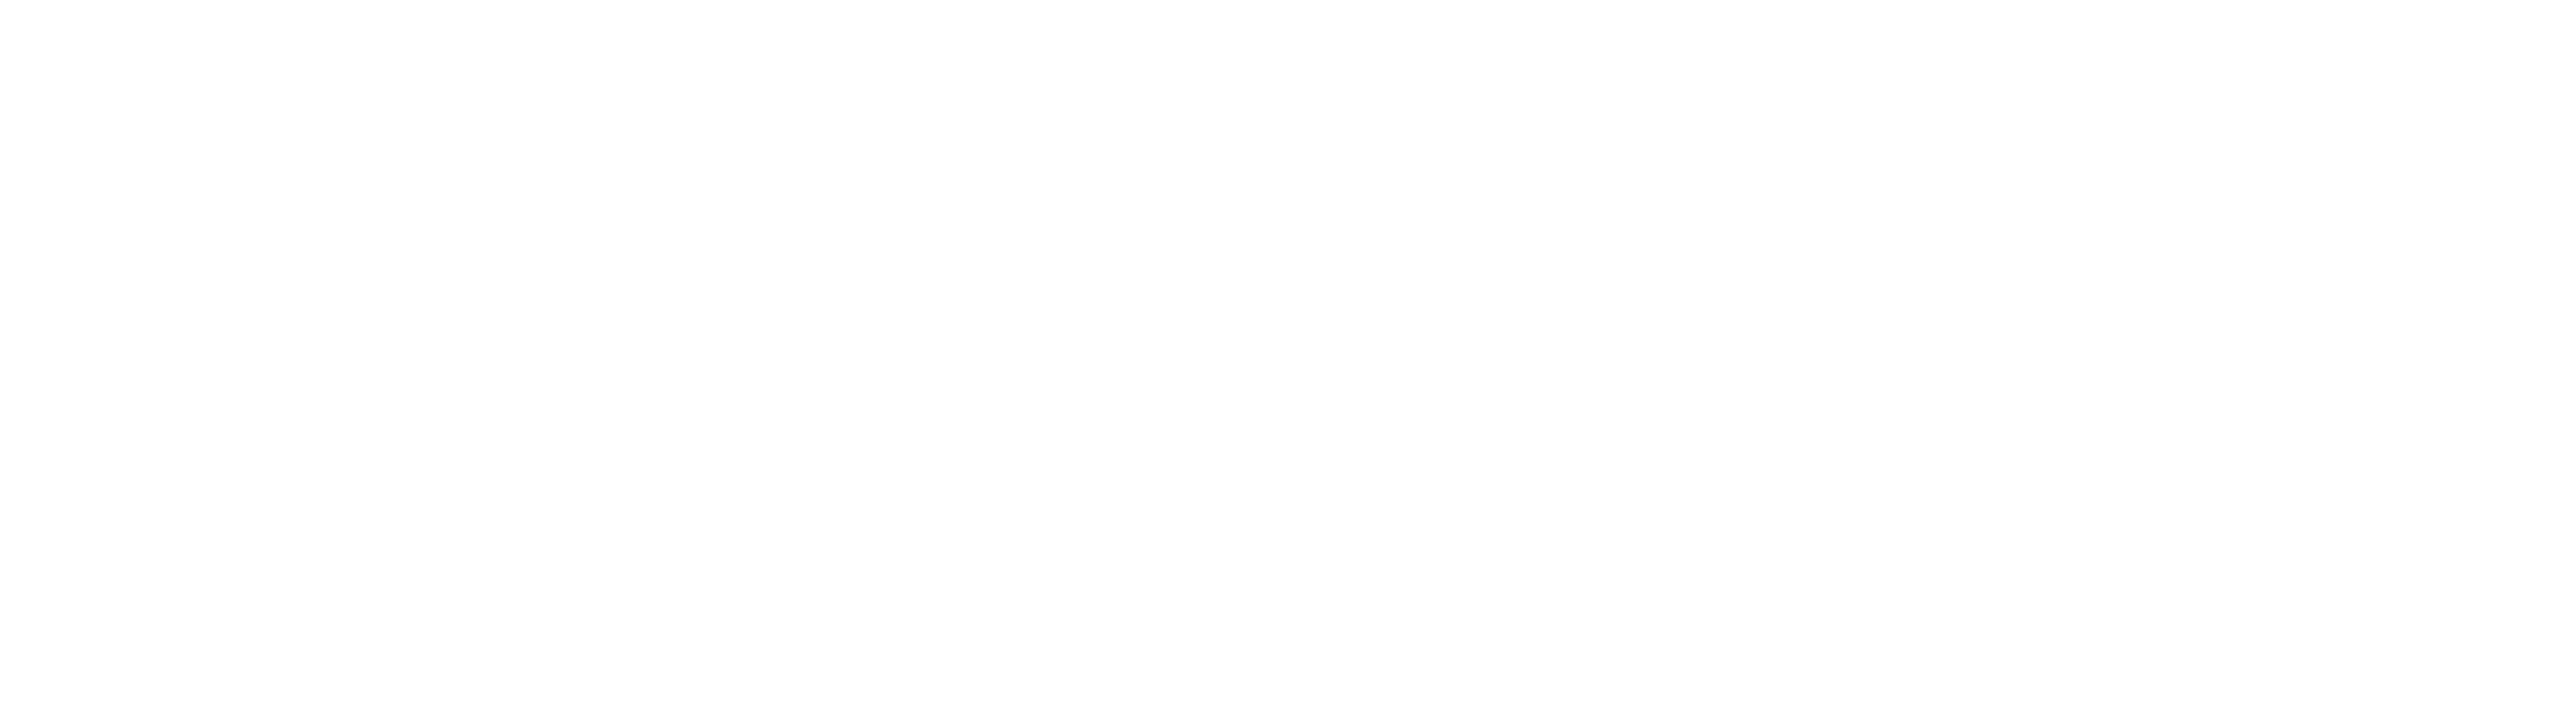 Script lettering that says Where your story begins